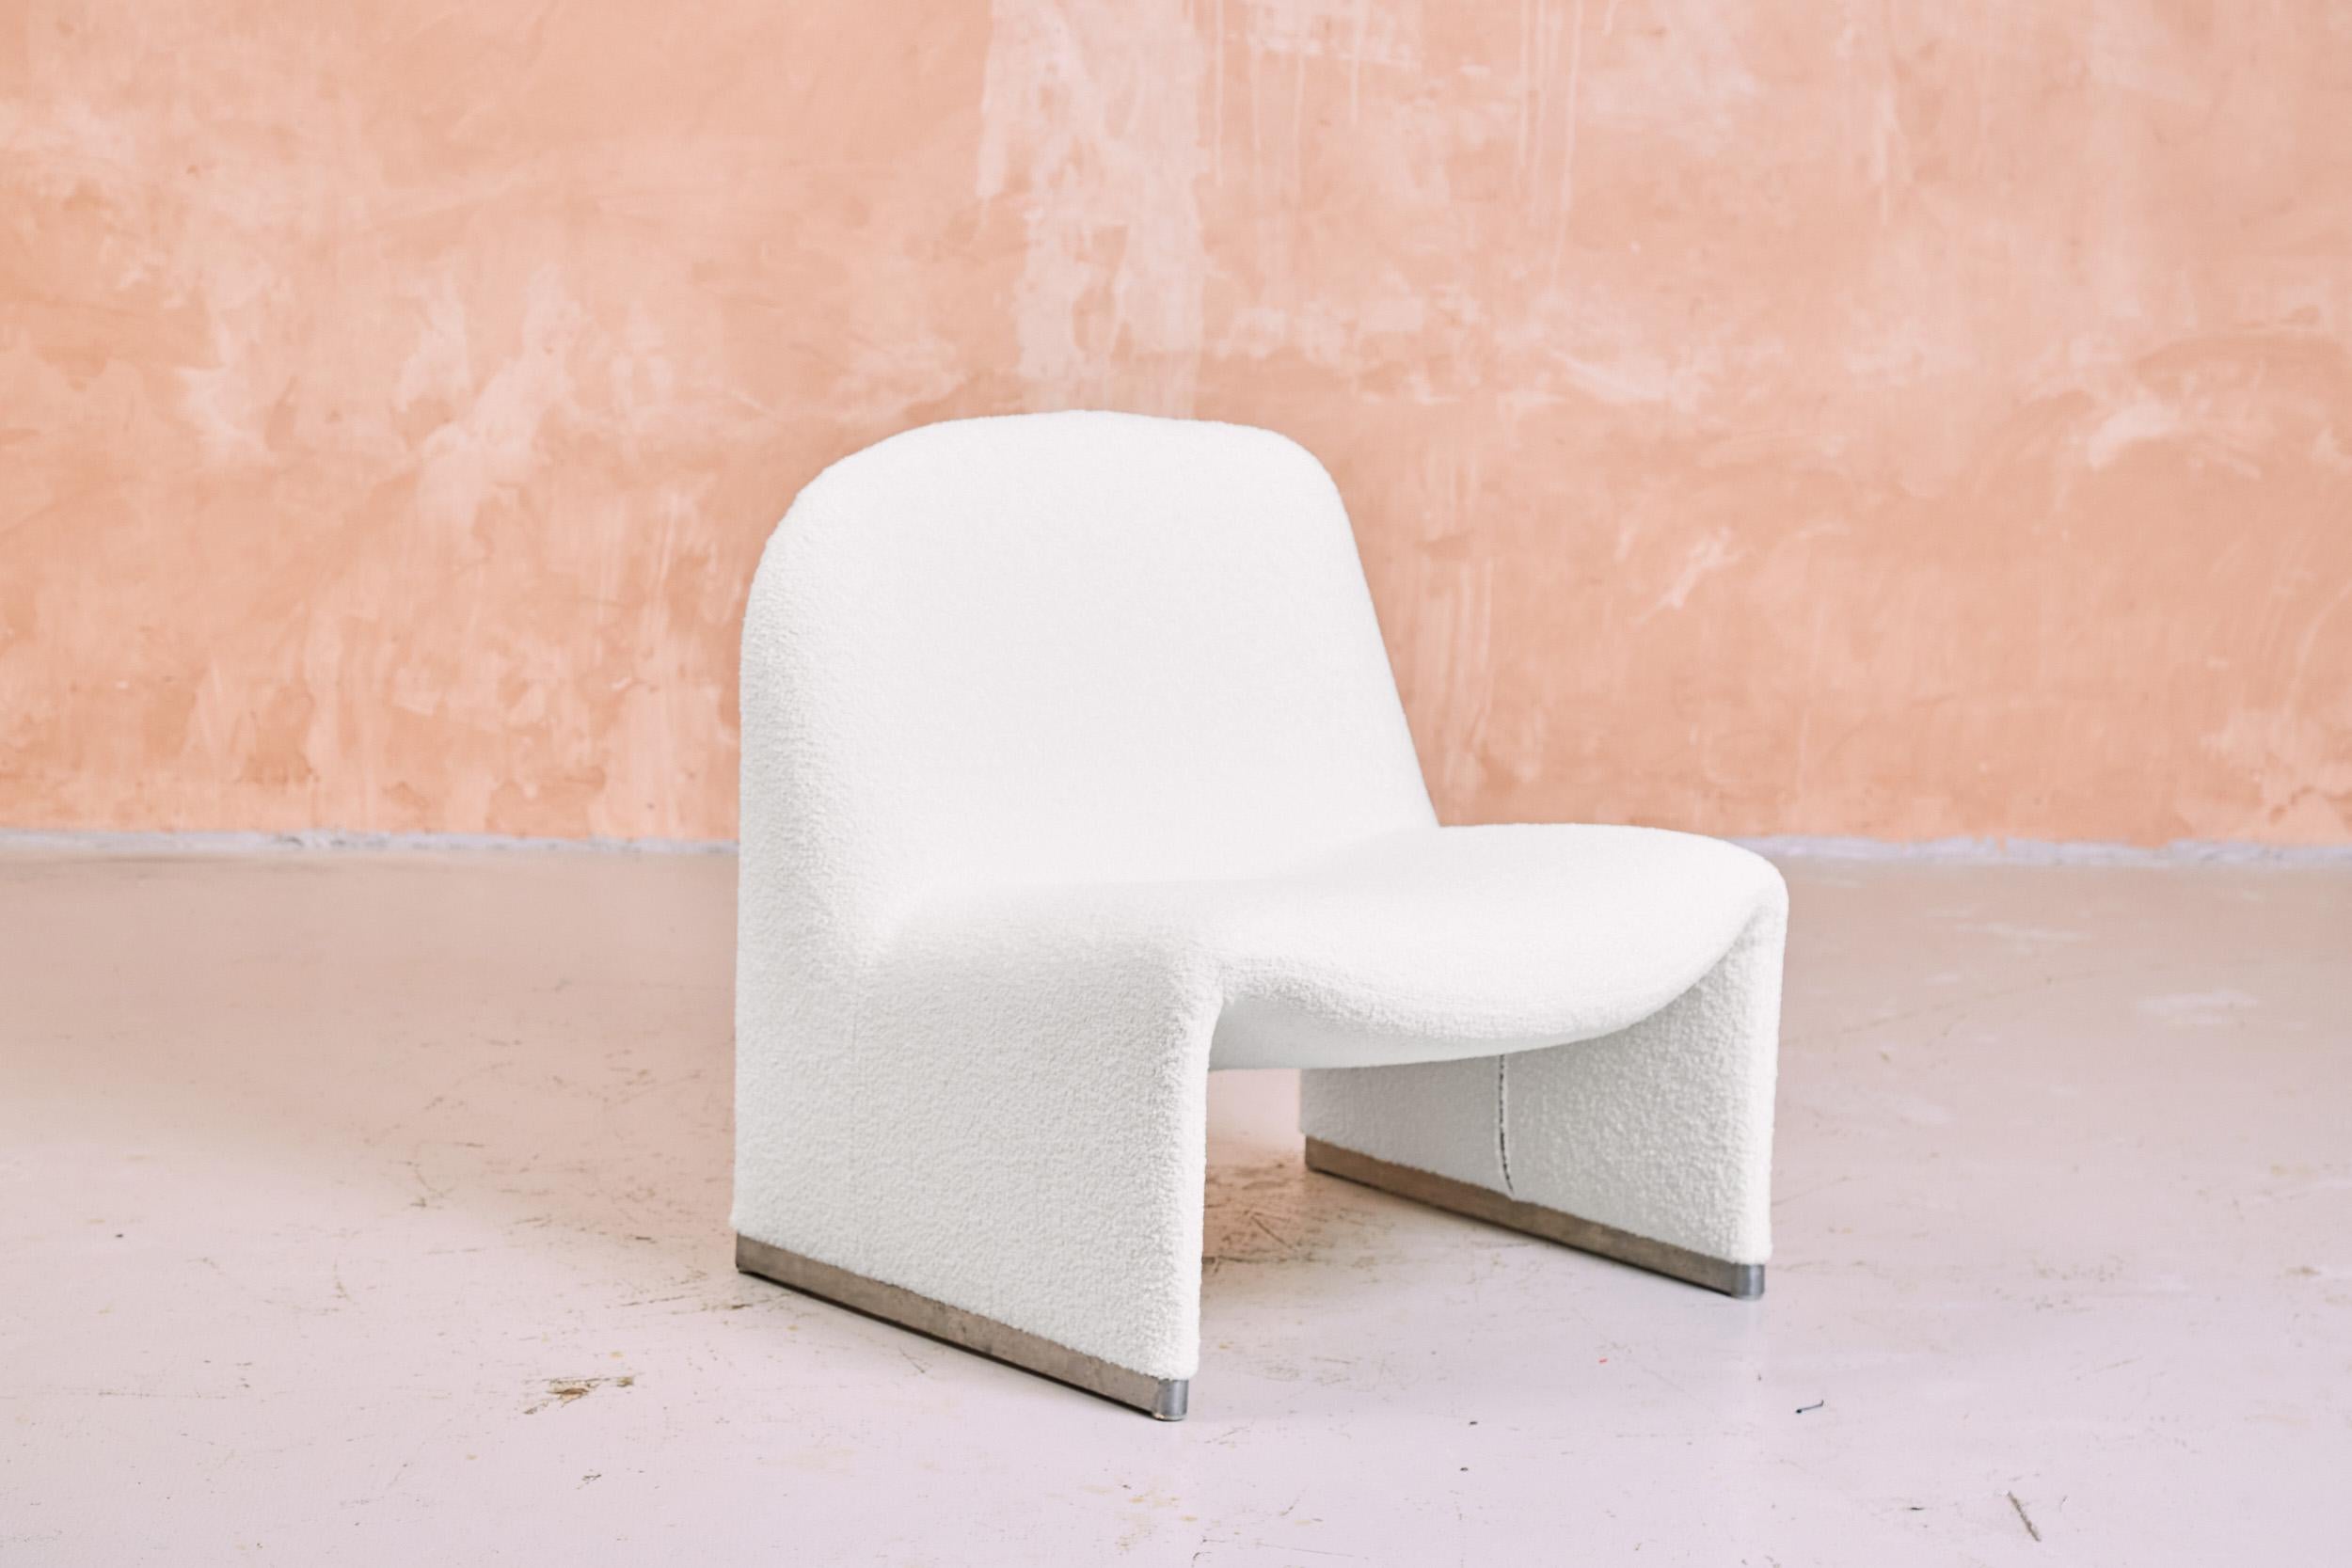 A pair of Alky chairs by Giancarlo Piretti, freshly re-upholstered in white bouclé fabric. The alky chair is an Italian mid century design classic, produced by Castelli in the 1970s. Piretti intended the Alky chair to appear as one seamless form and